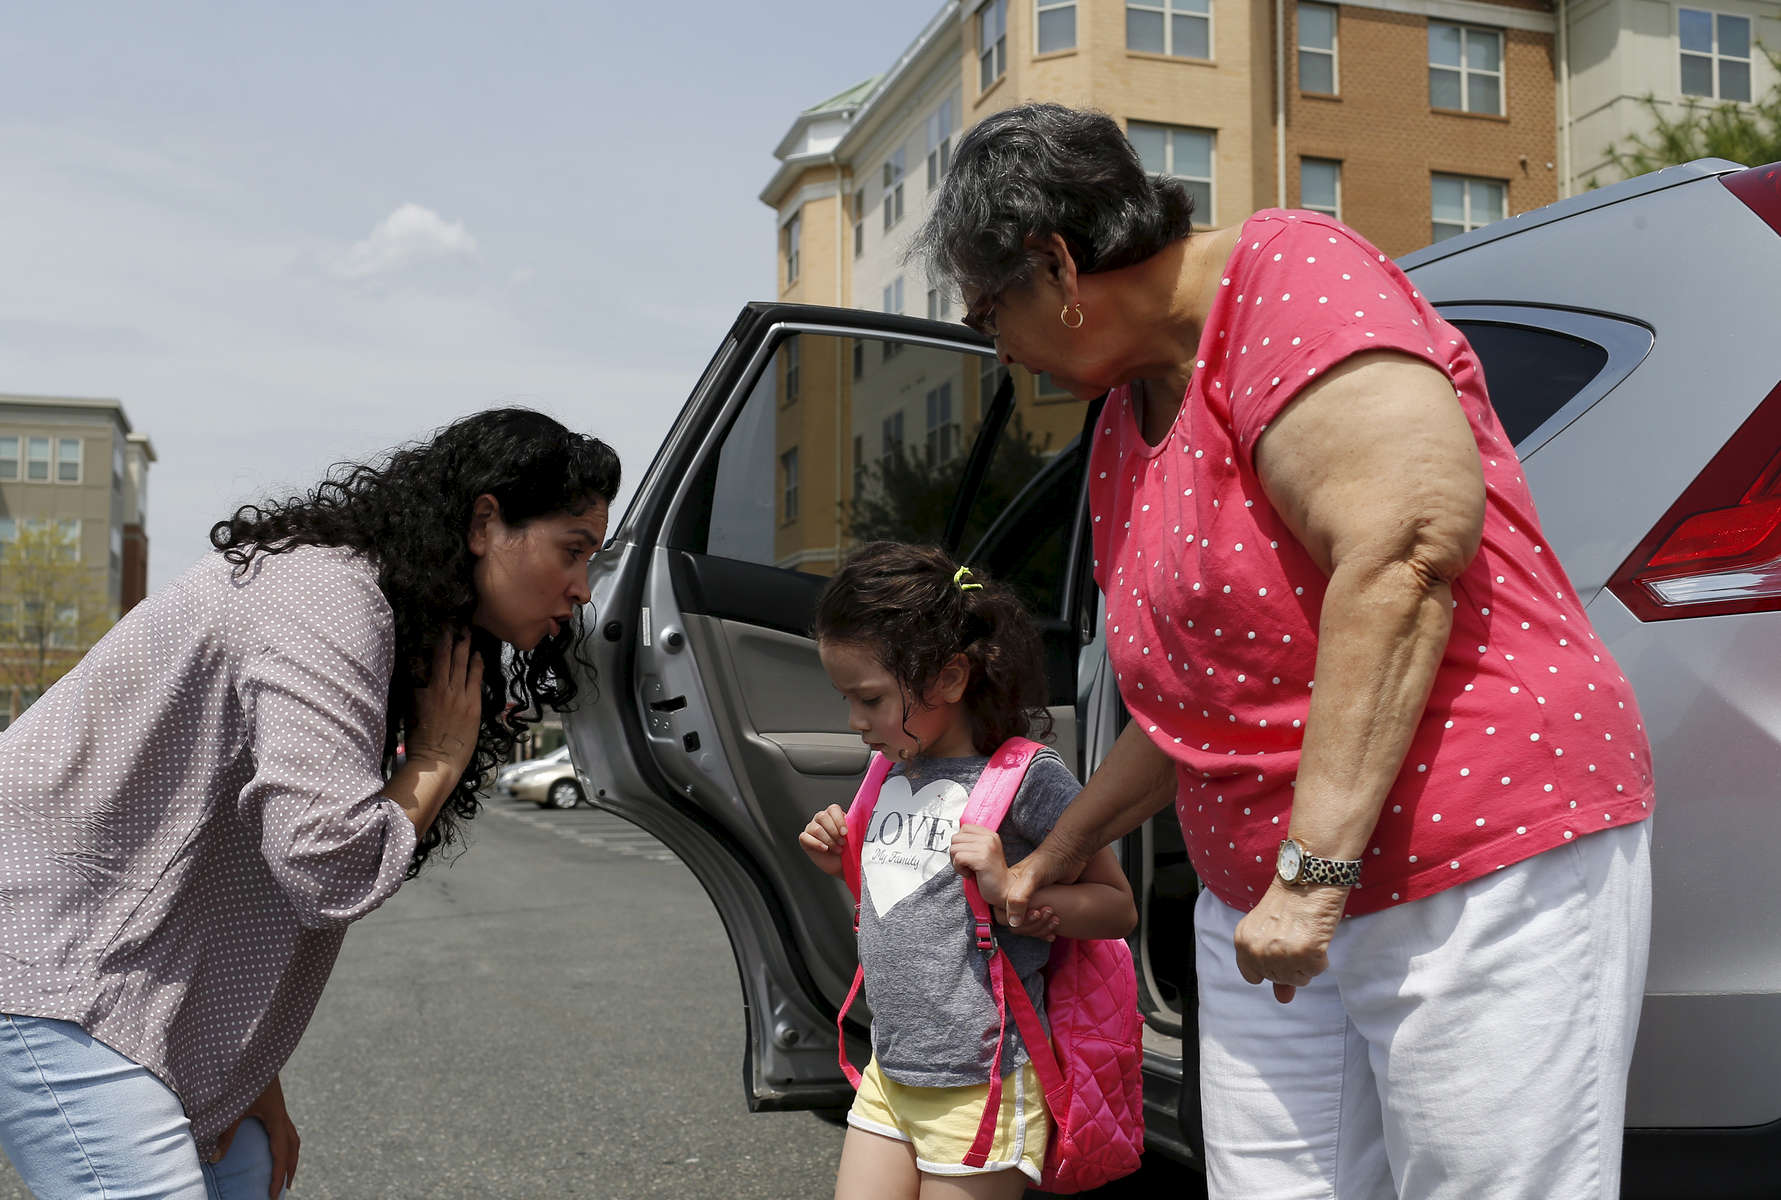 Revere, MA -- 5/3/2018 - Patricia bent down to say goodbye to her daughter, Camila, as she dropped her off with her Godmother's mom, Tete, before a meeting with her immigration lawyer. Fearful that the Trump administration might repeal her Temporary Protected Status Patricia has started to make plans for her daughter, Camila, 4, who is a US citizen. If her TPS was repealed and Patricia were to be unexpectedly picked up and deported, Camila would stay with Tete, one of the few trusted friends that Patricia has who has US citizenship. 